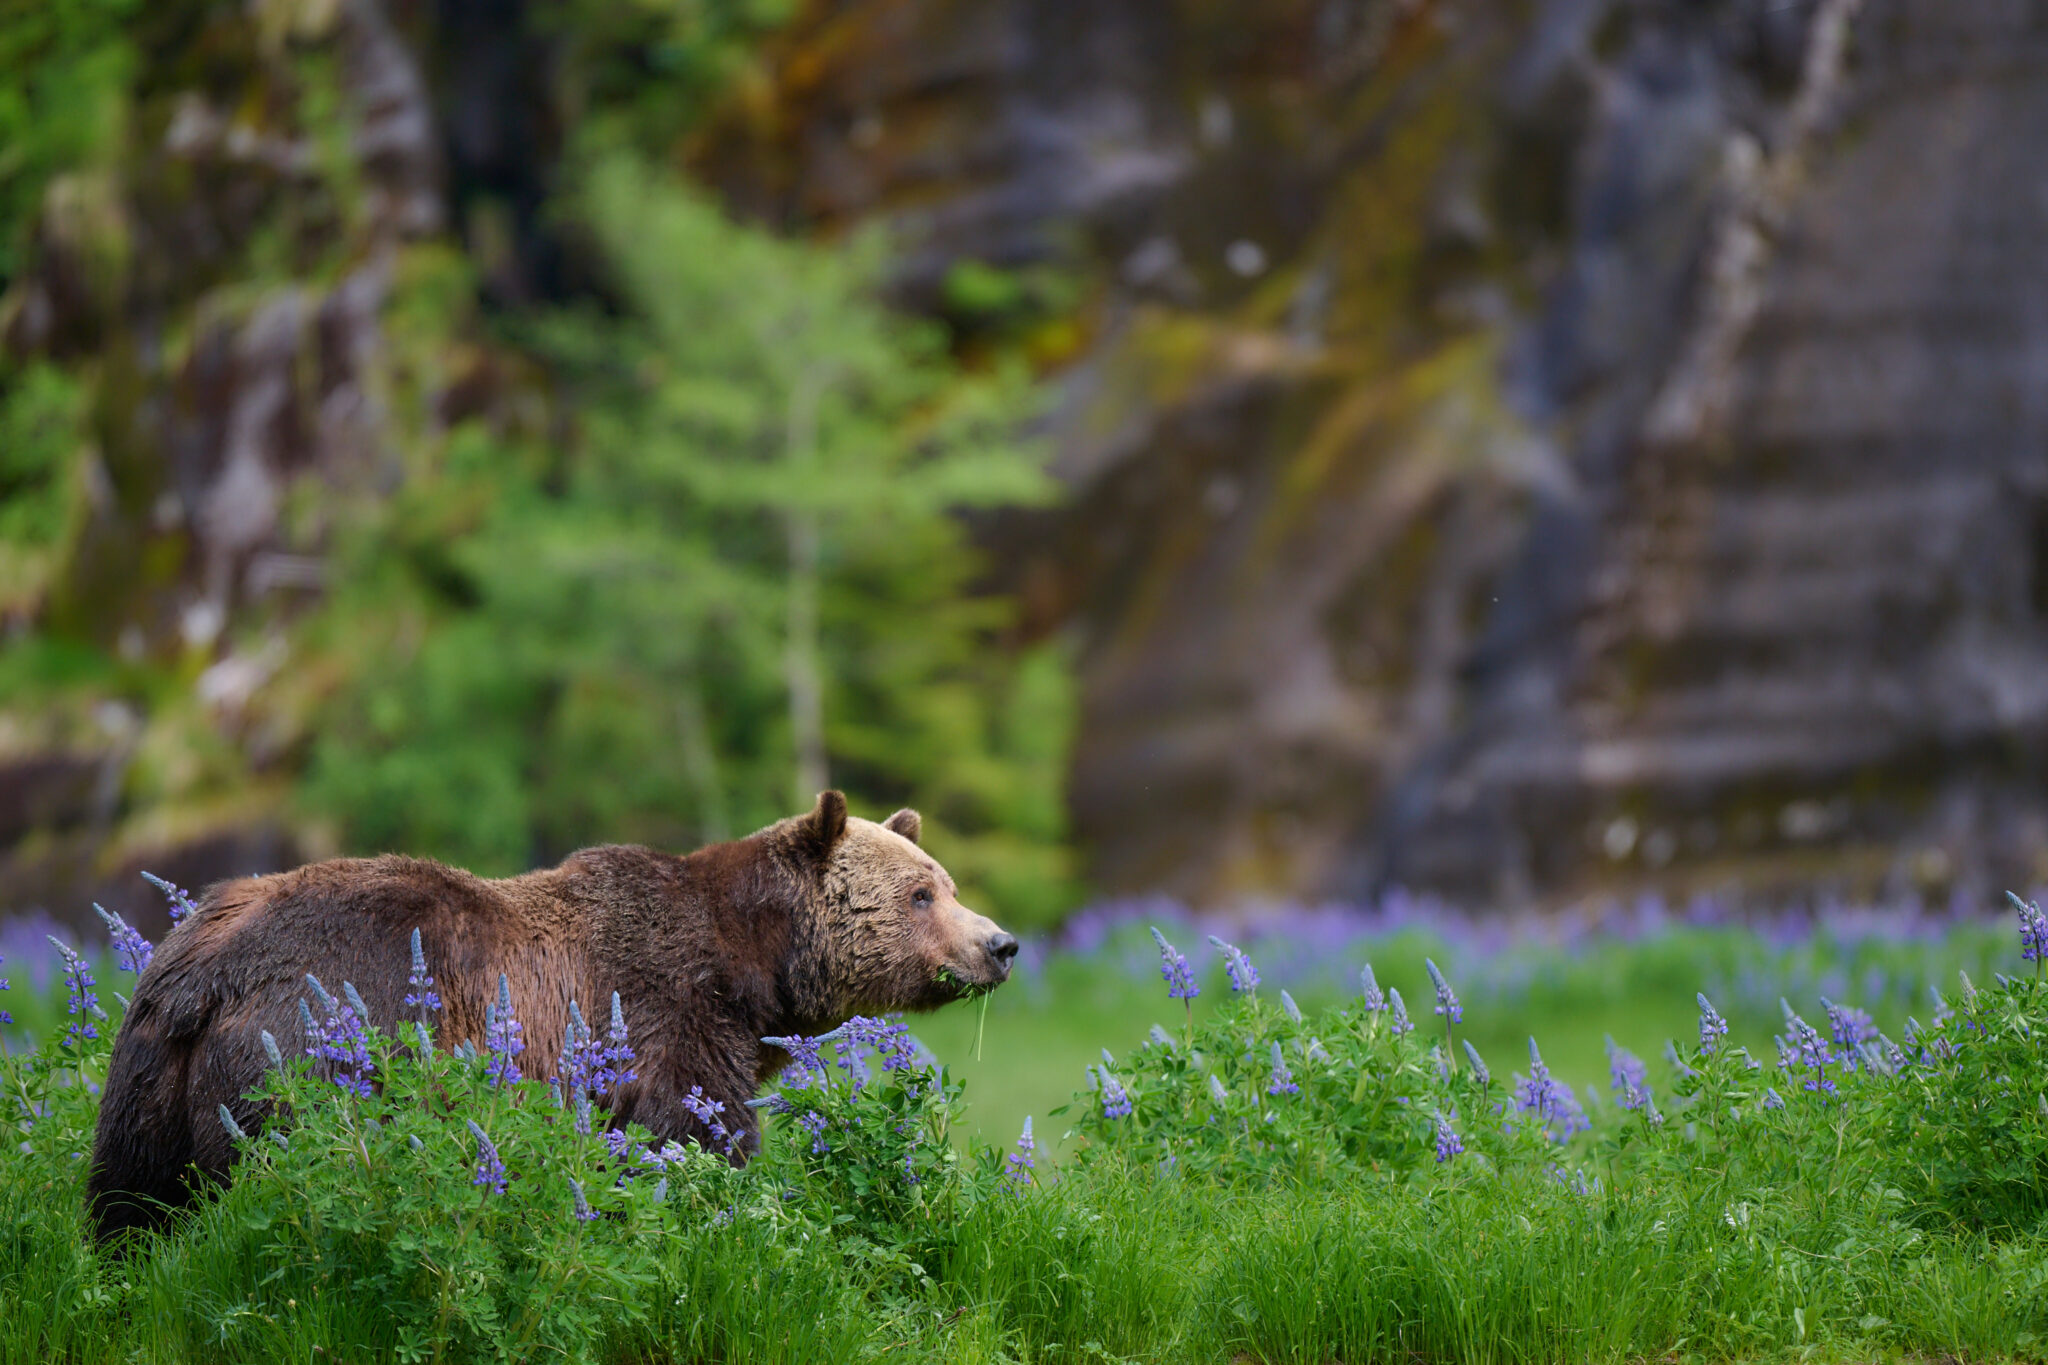 Spring in the Great Bear | Credit: Michael Wieser